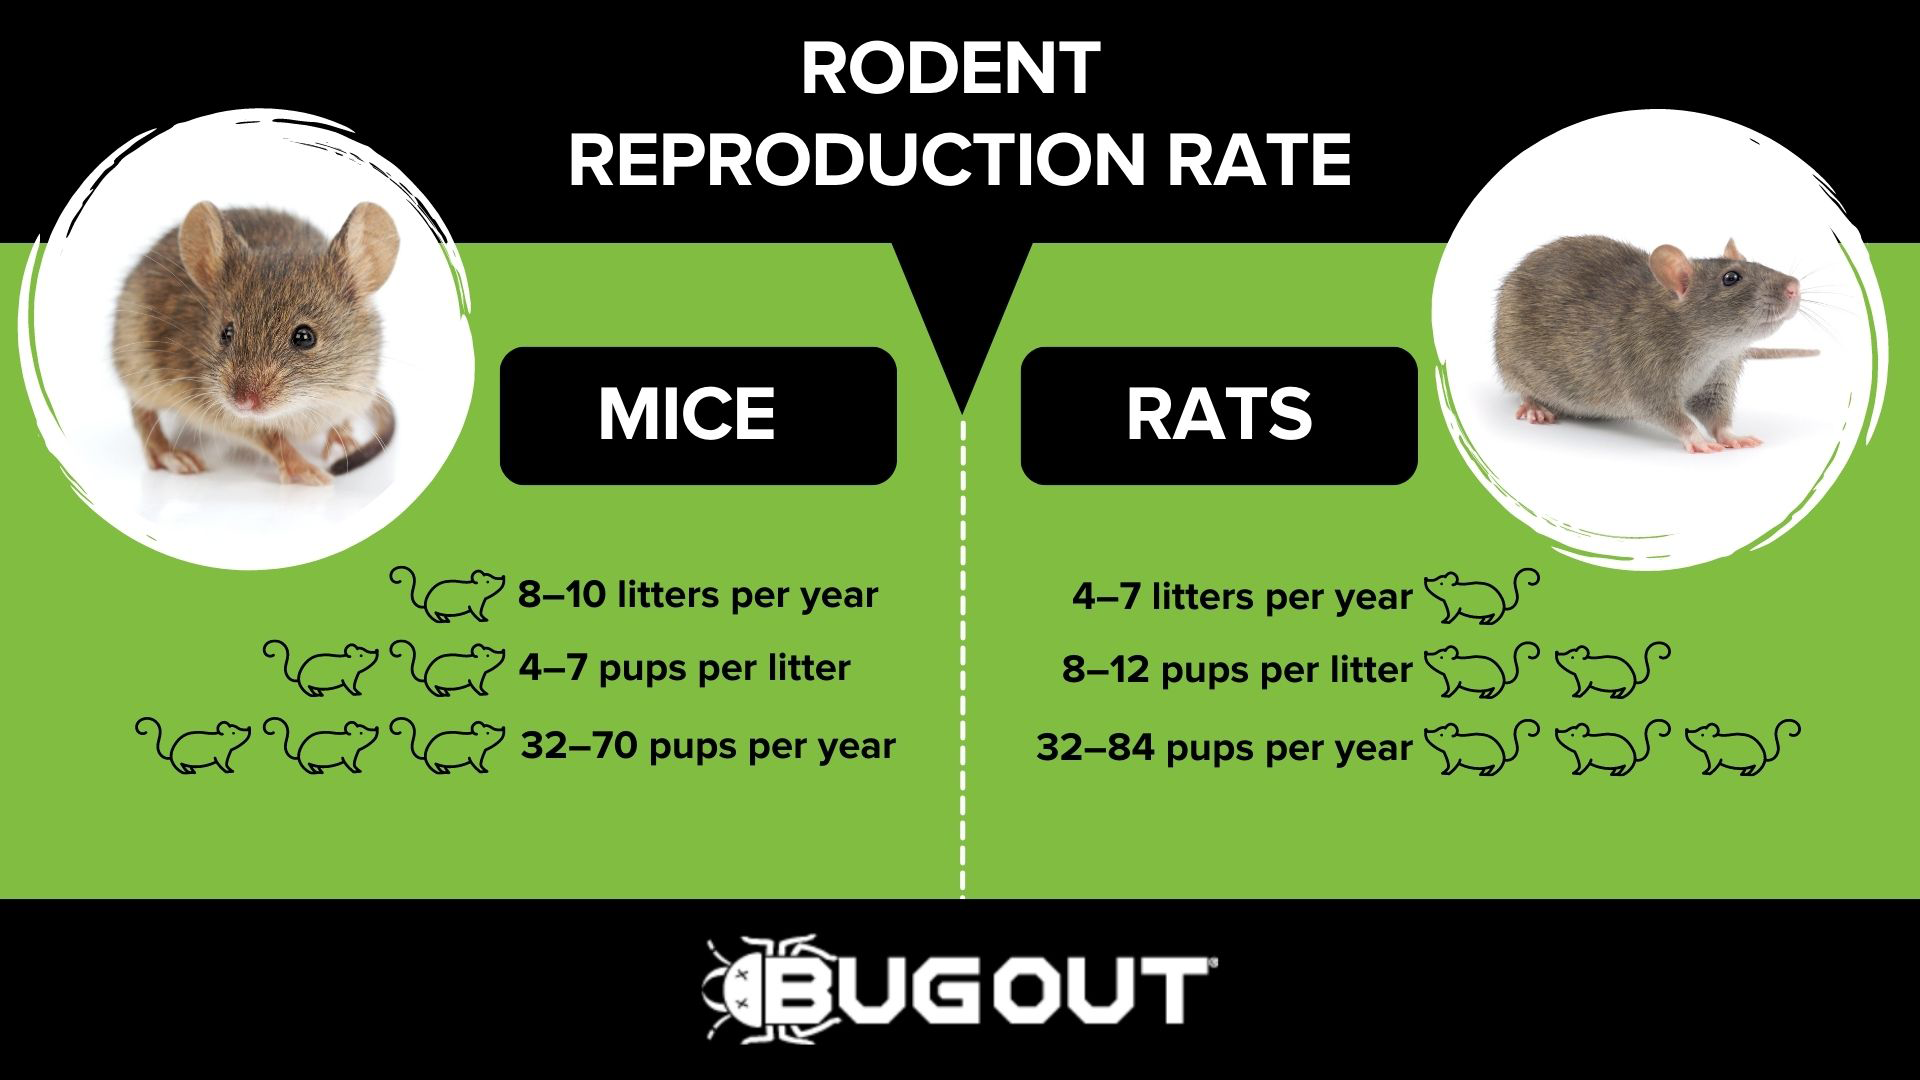 Rodent extermination services in Lubbock, TX